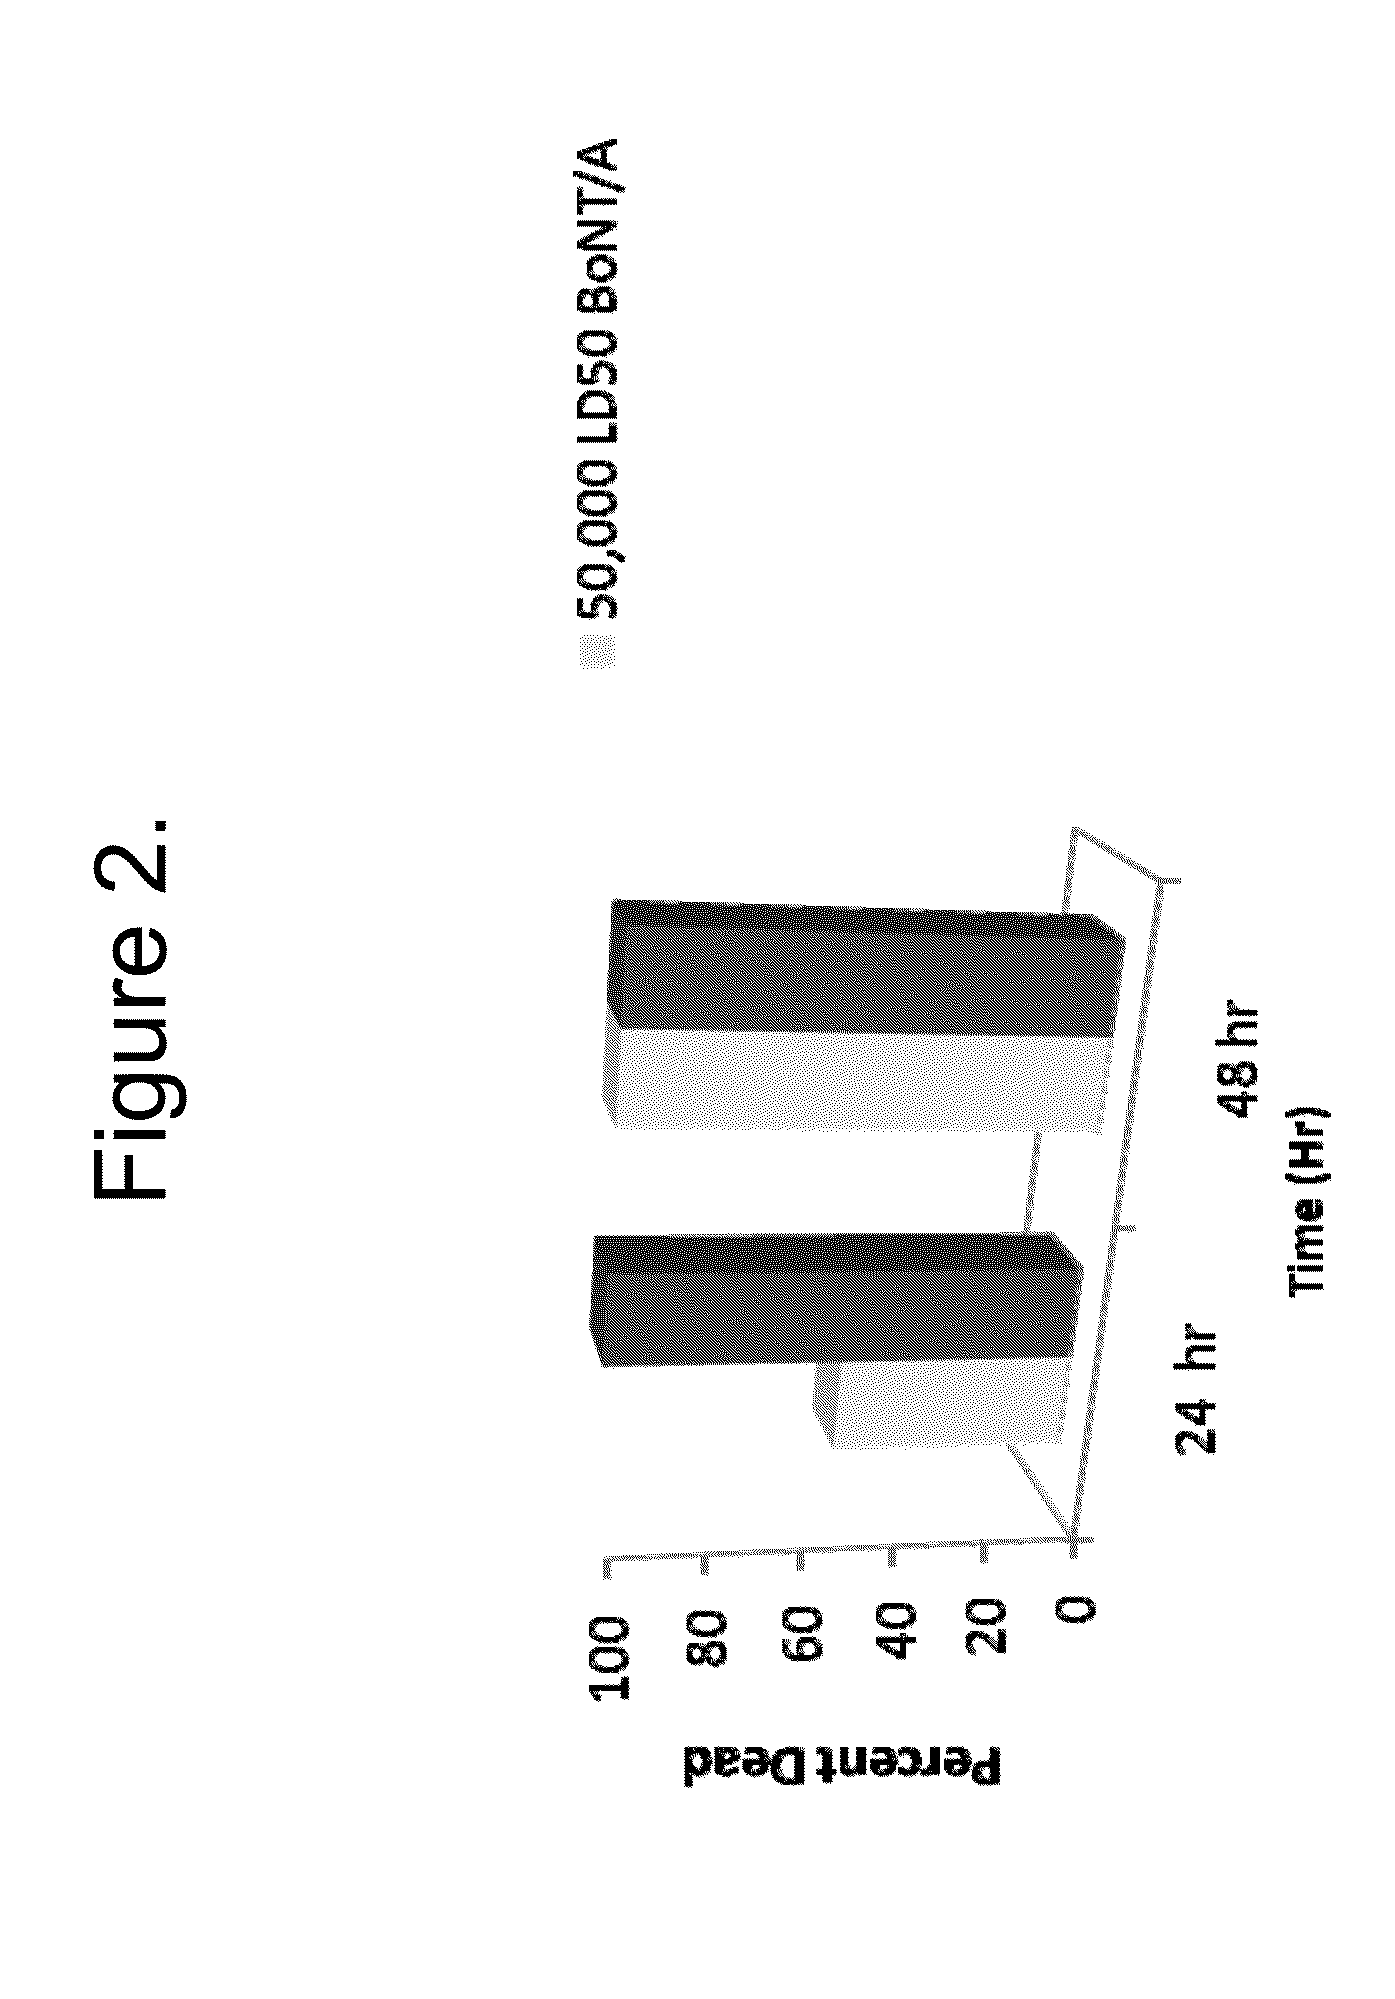 Systems and methods for delivery of biologically active agents